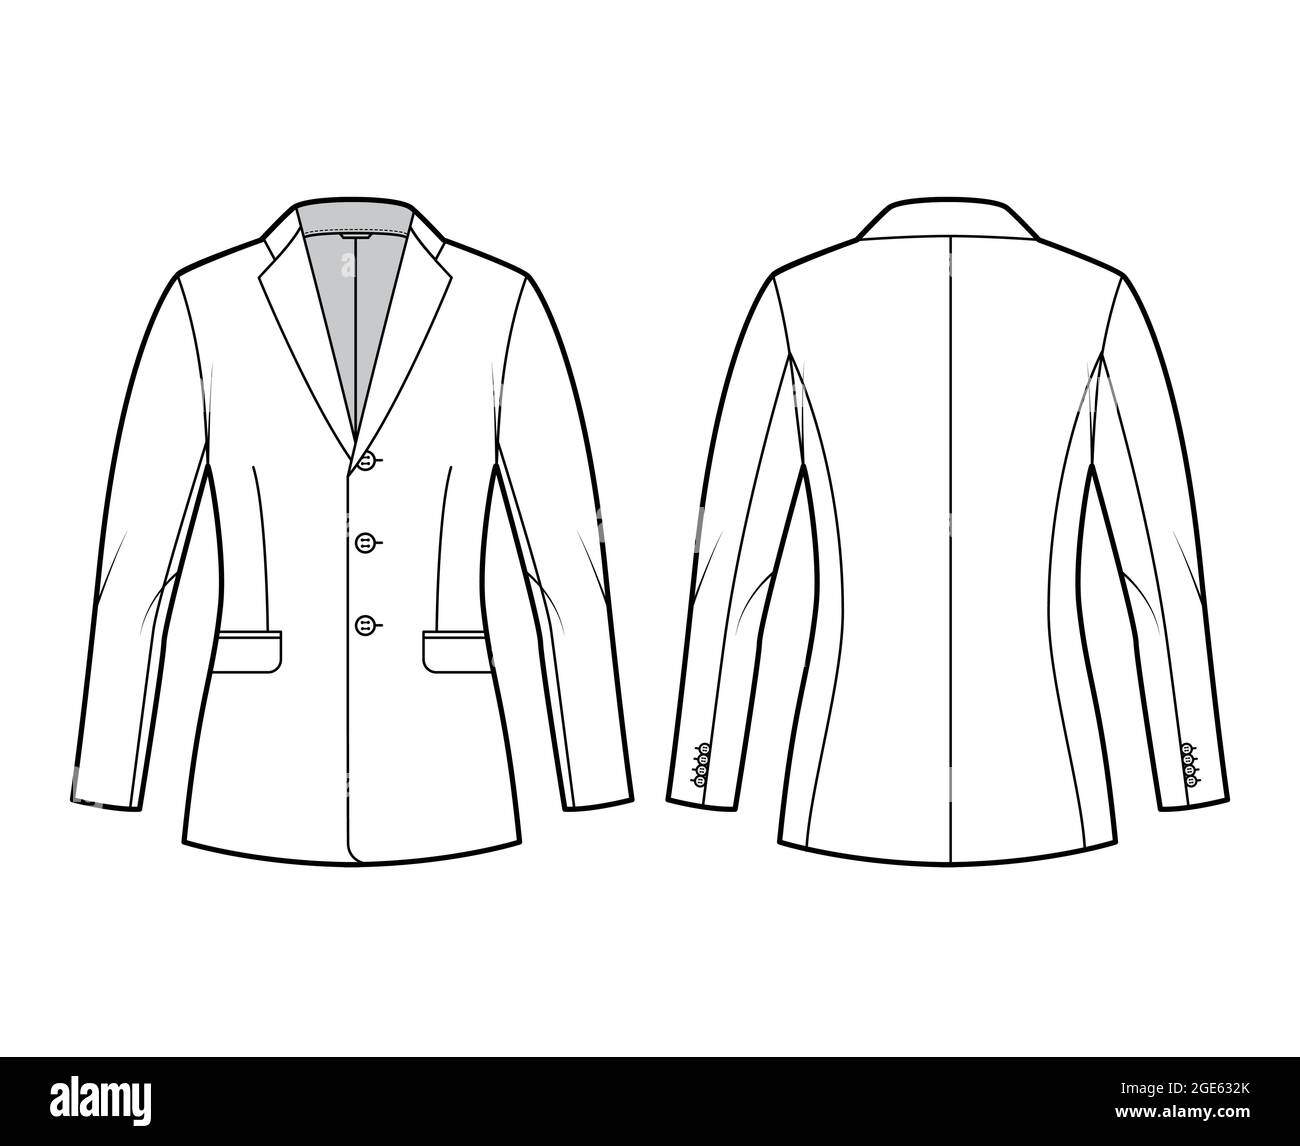 Blazer fitted jacket suit technical fashion illustration with single breasted, notched lapel collar, flap pockets, fitted body, hip length. Flat template front, back white color. Women, men CAD mockup Stock Vector